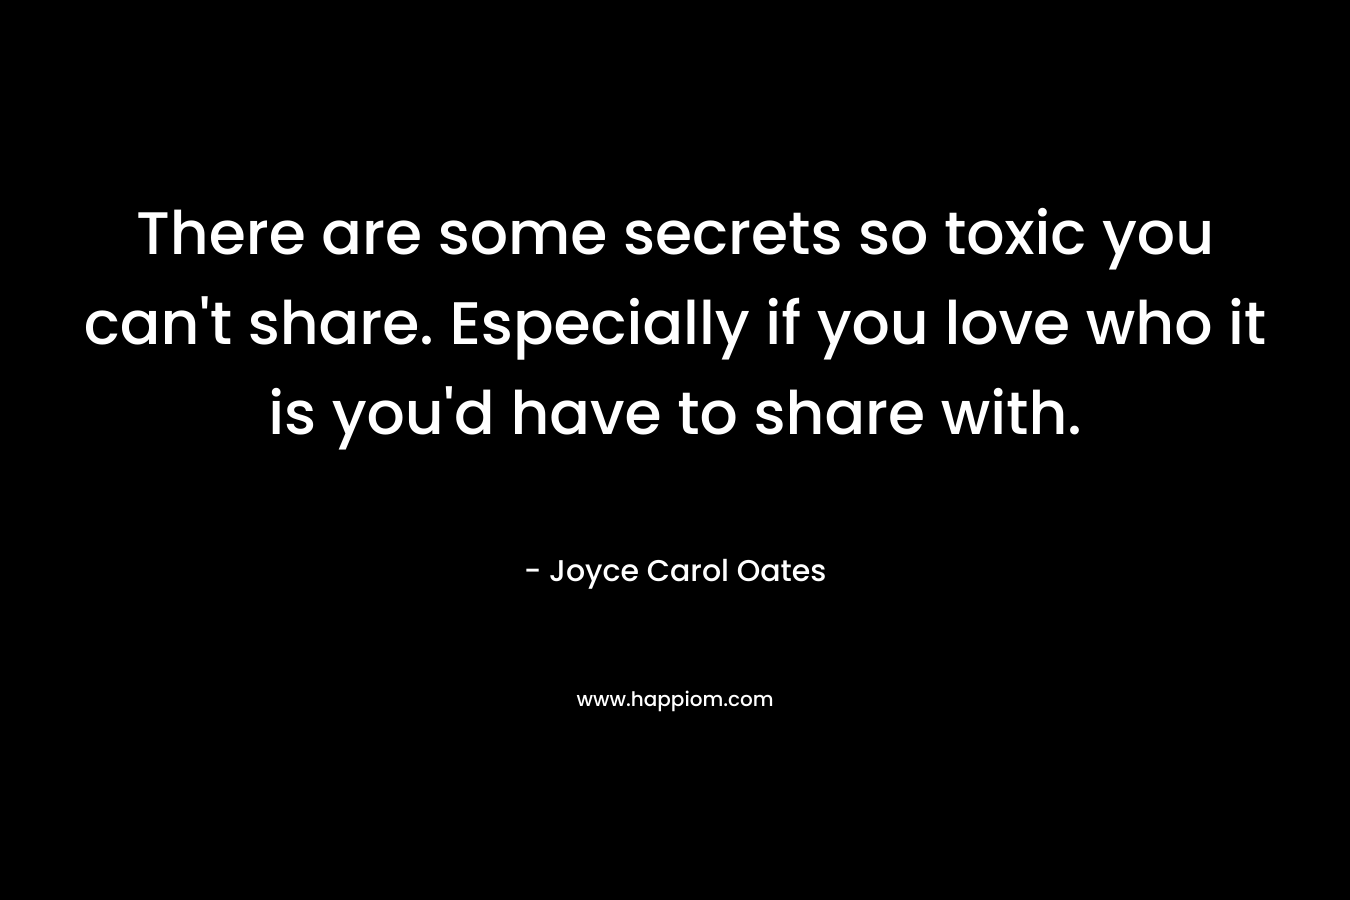 There are some secrets so toxic you can't share. Especially if you love who it is you'd have to share with.